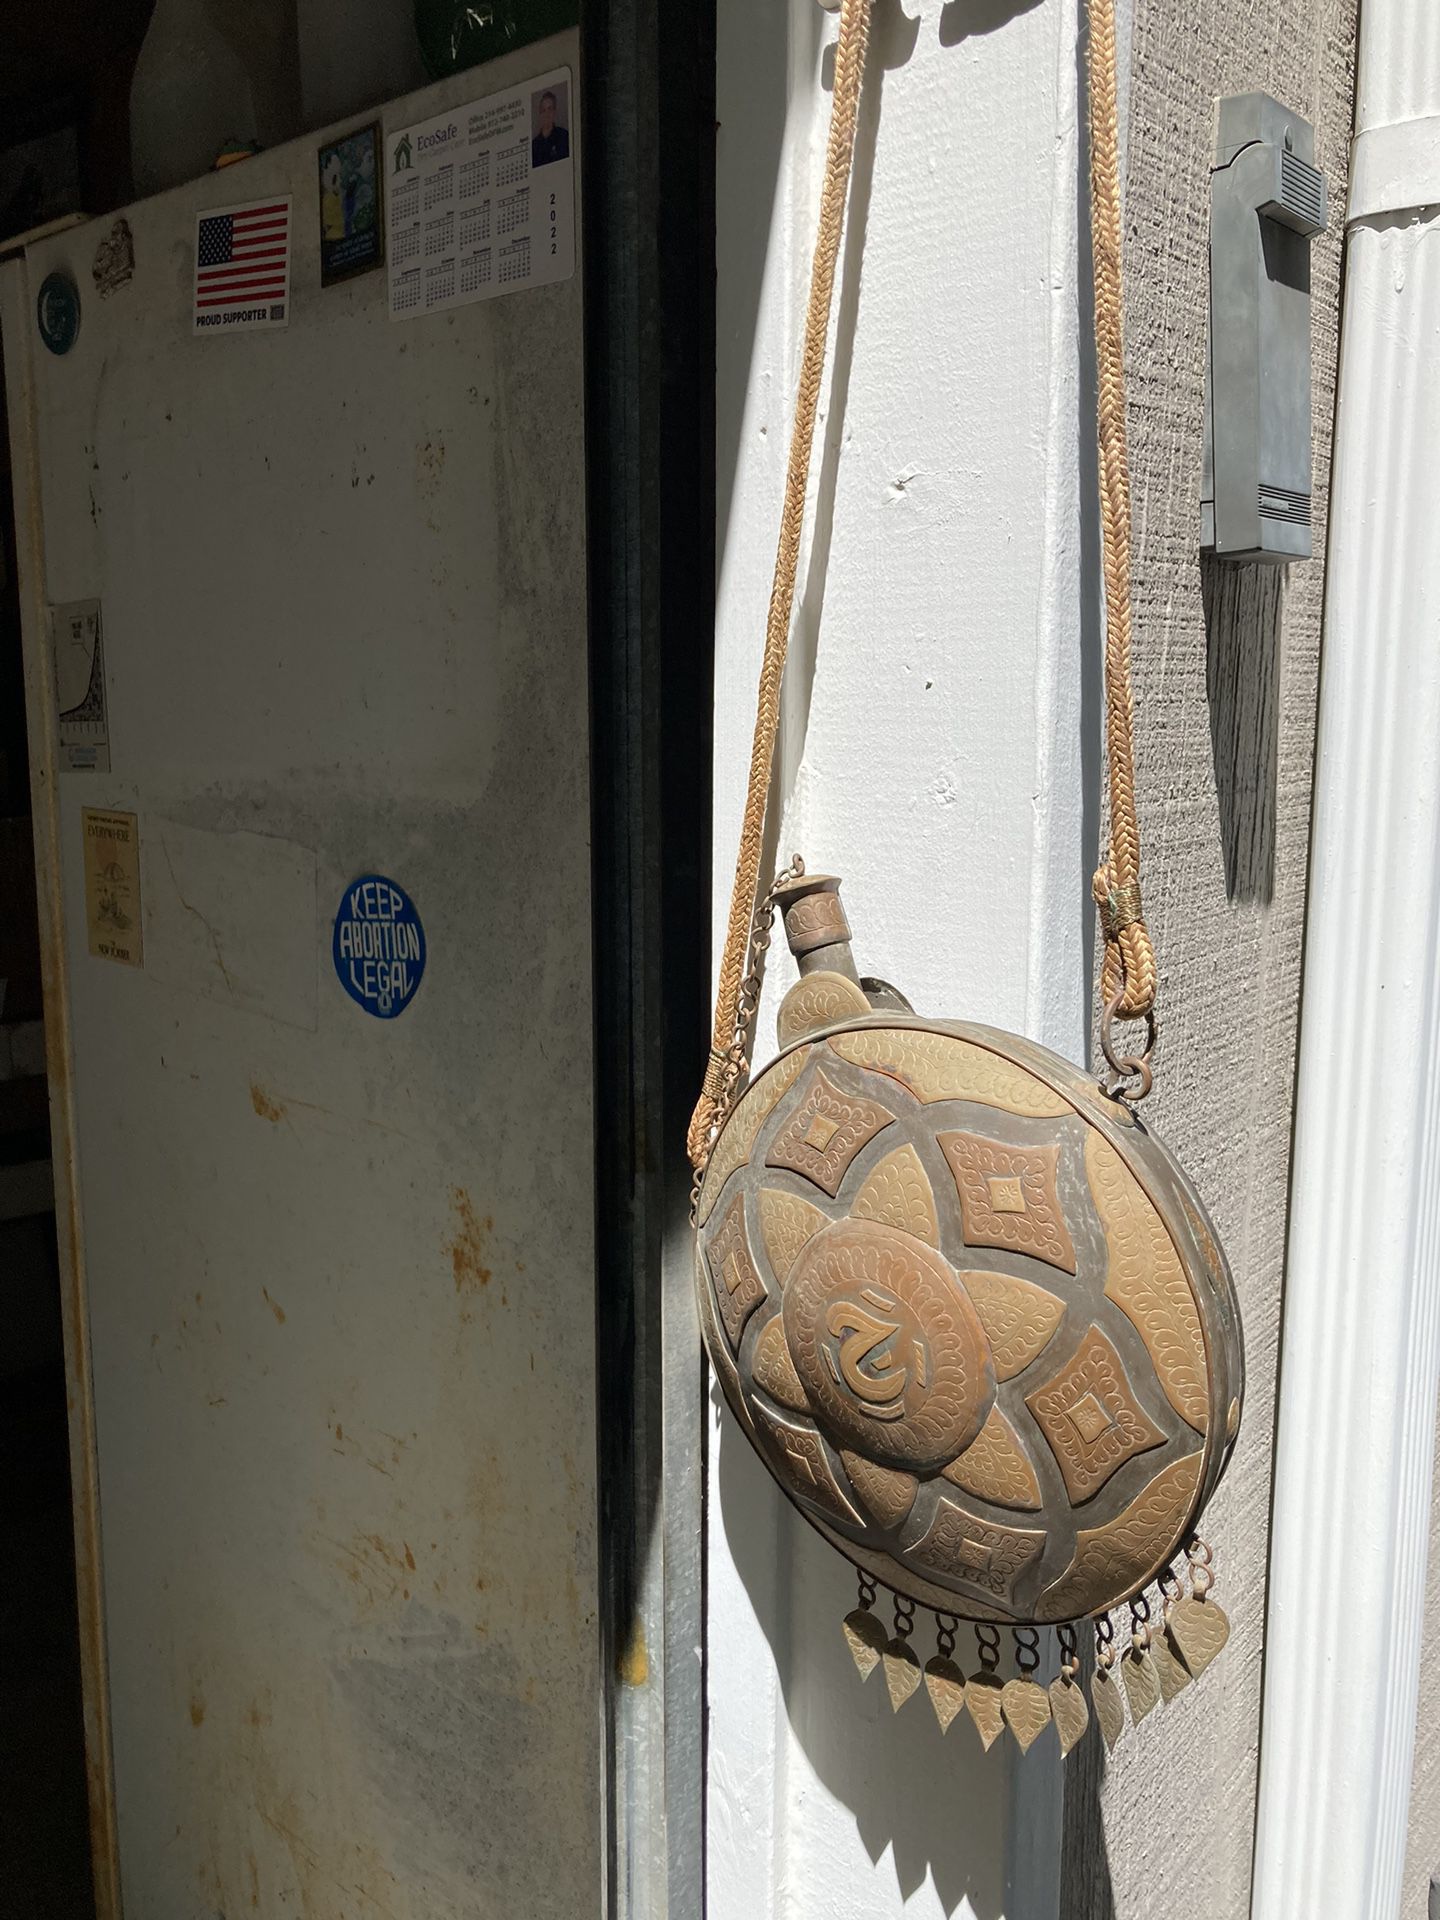 Antique Metal Canteen From Morocco